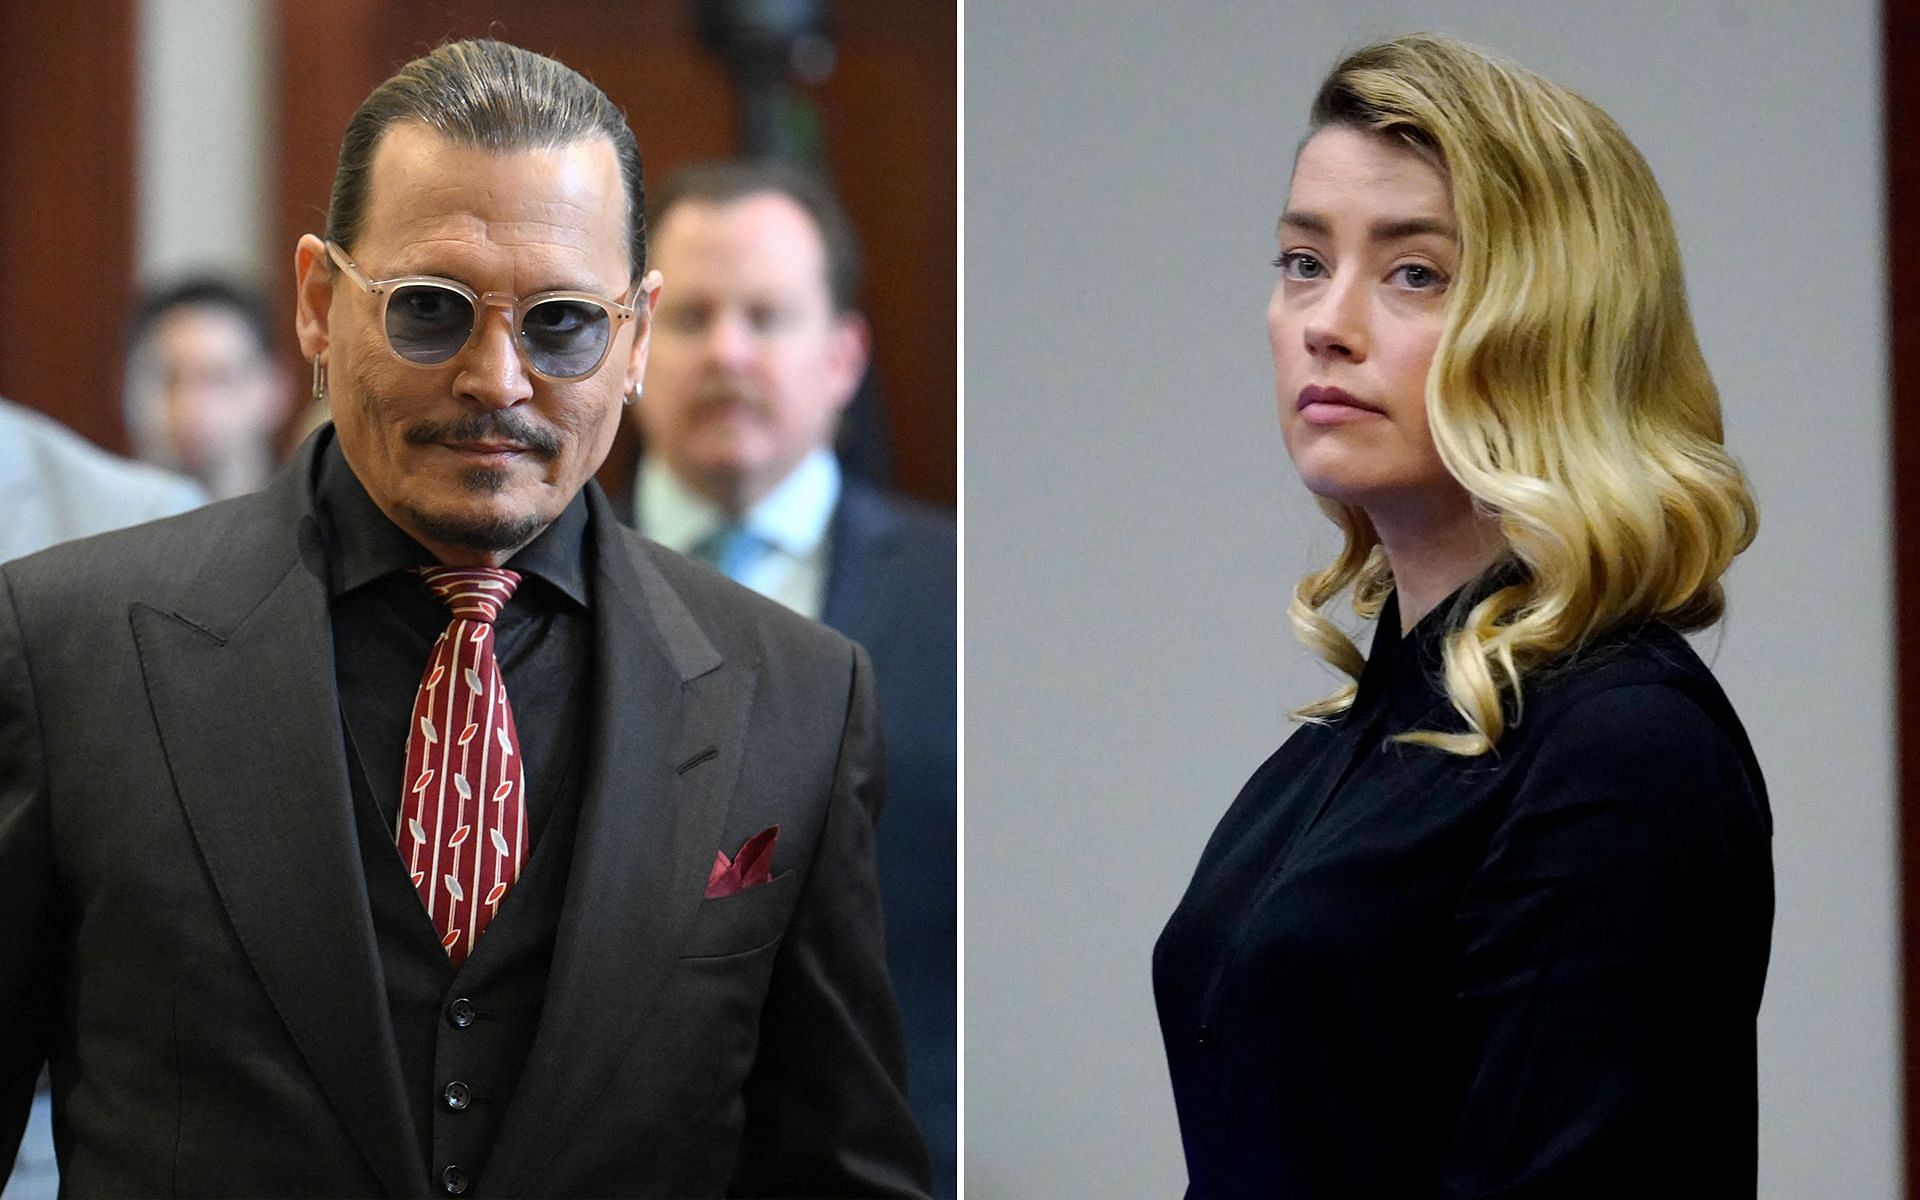 The expected date of the verdict for Johnny Depp x Amber Heard&#039;s trial is May 27, 2022. (Image via Getty Images)